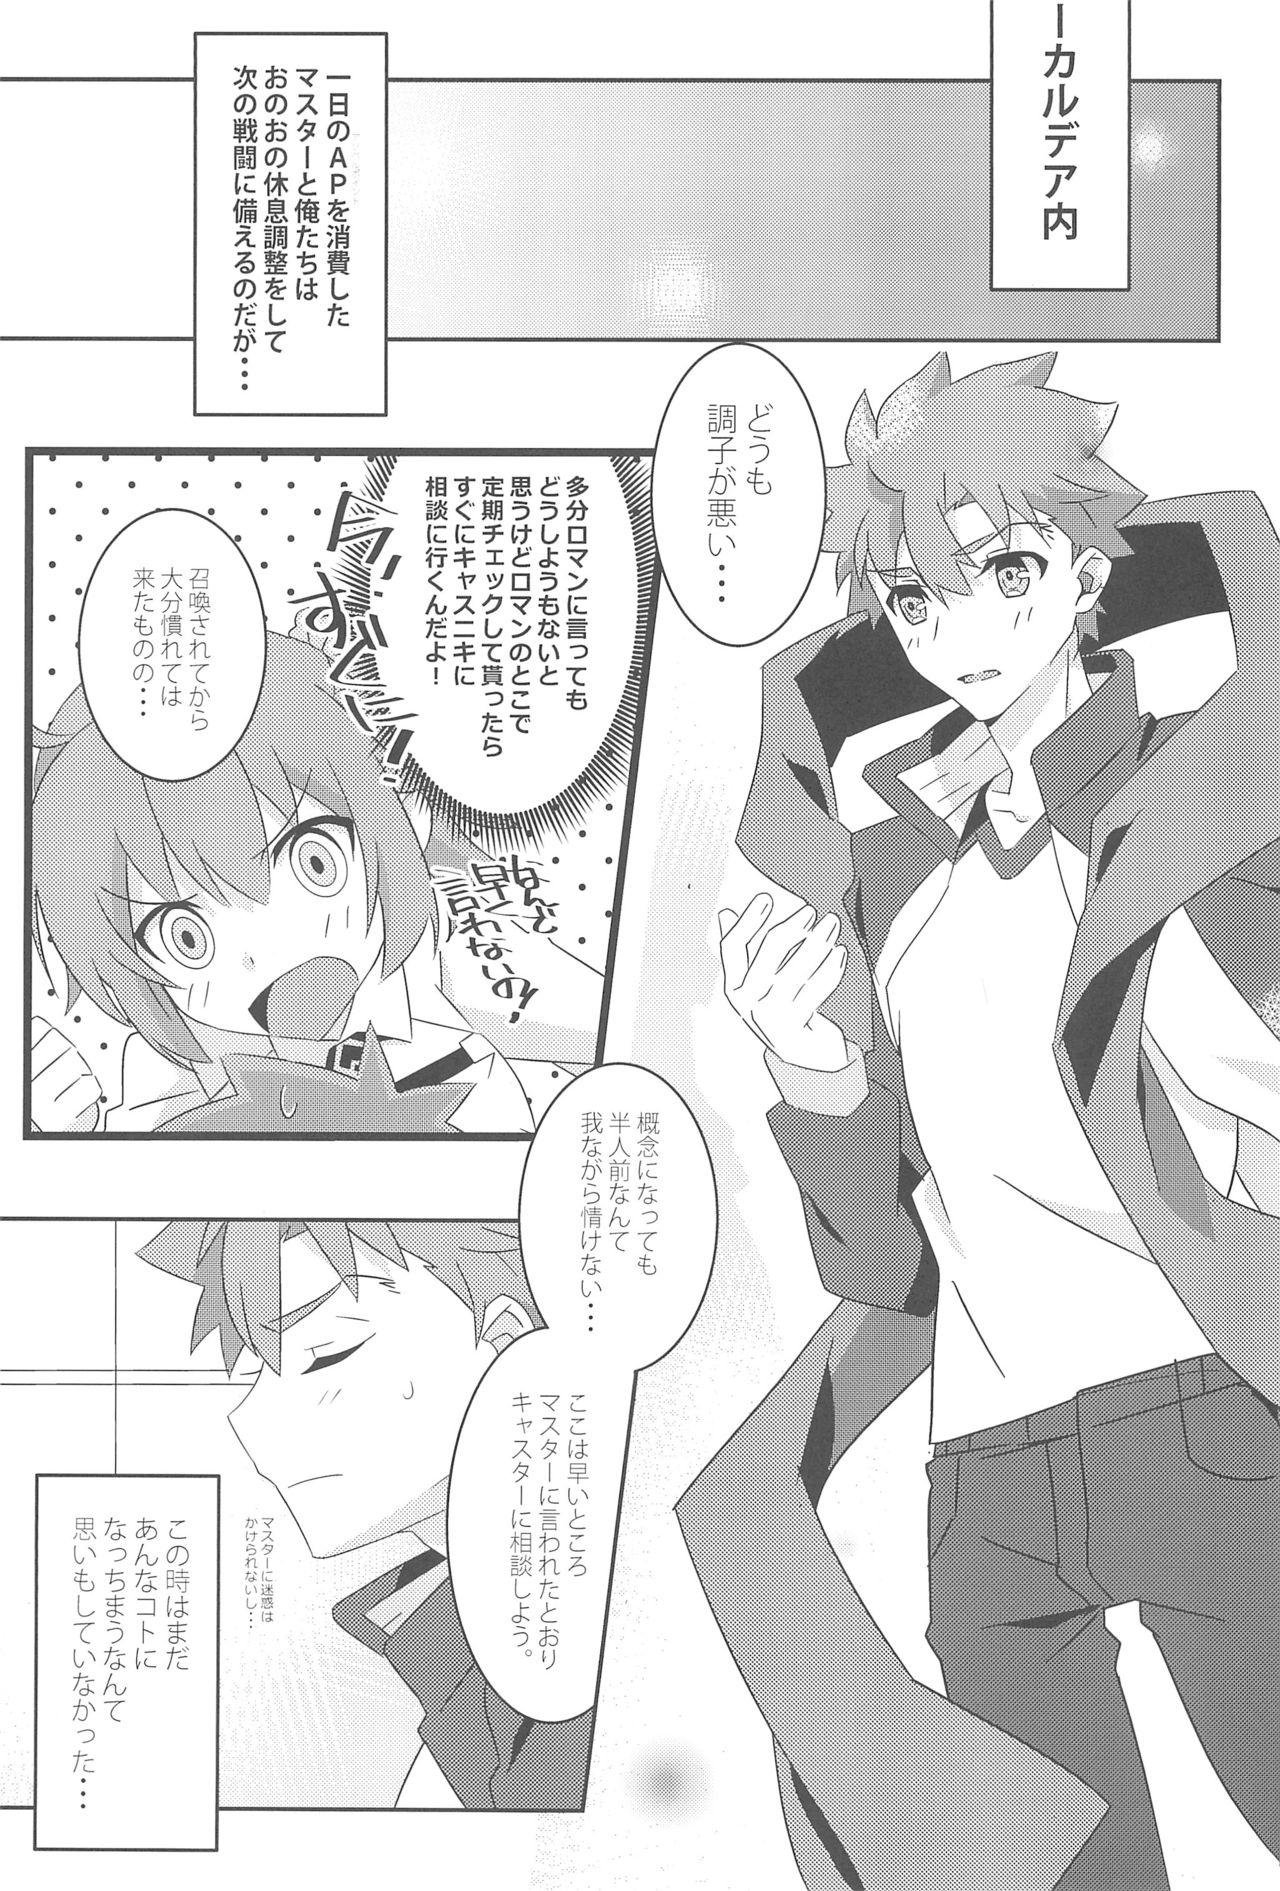 Toys COME TO ME - Fate stay night Glory Hole - Page 5